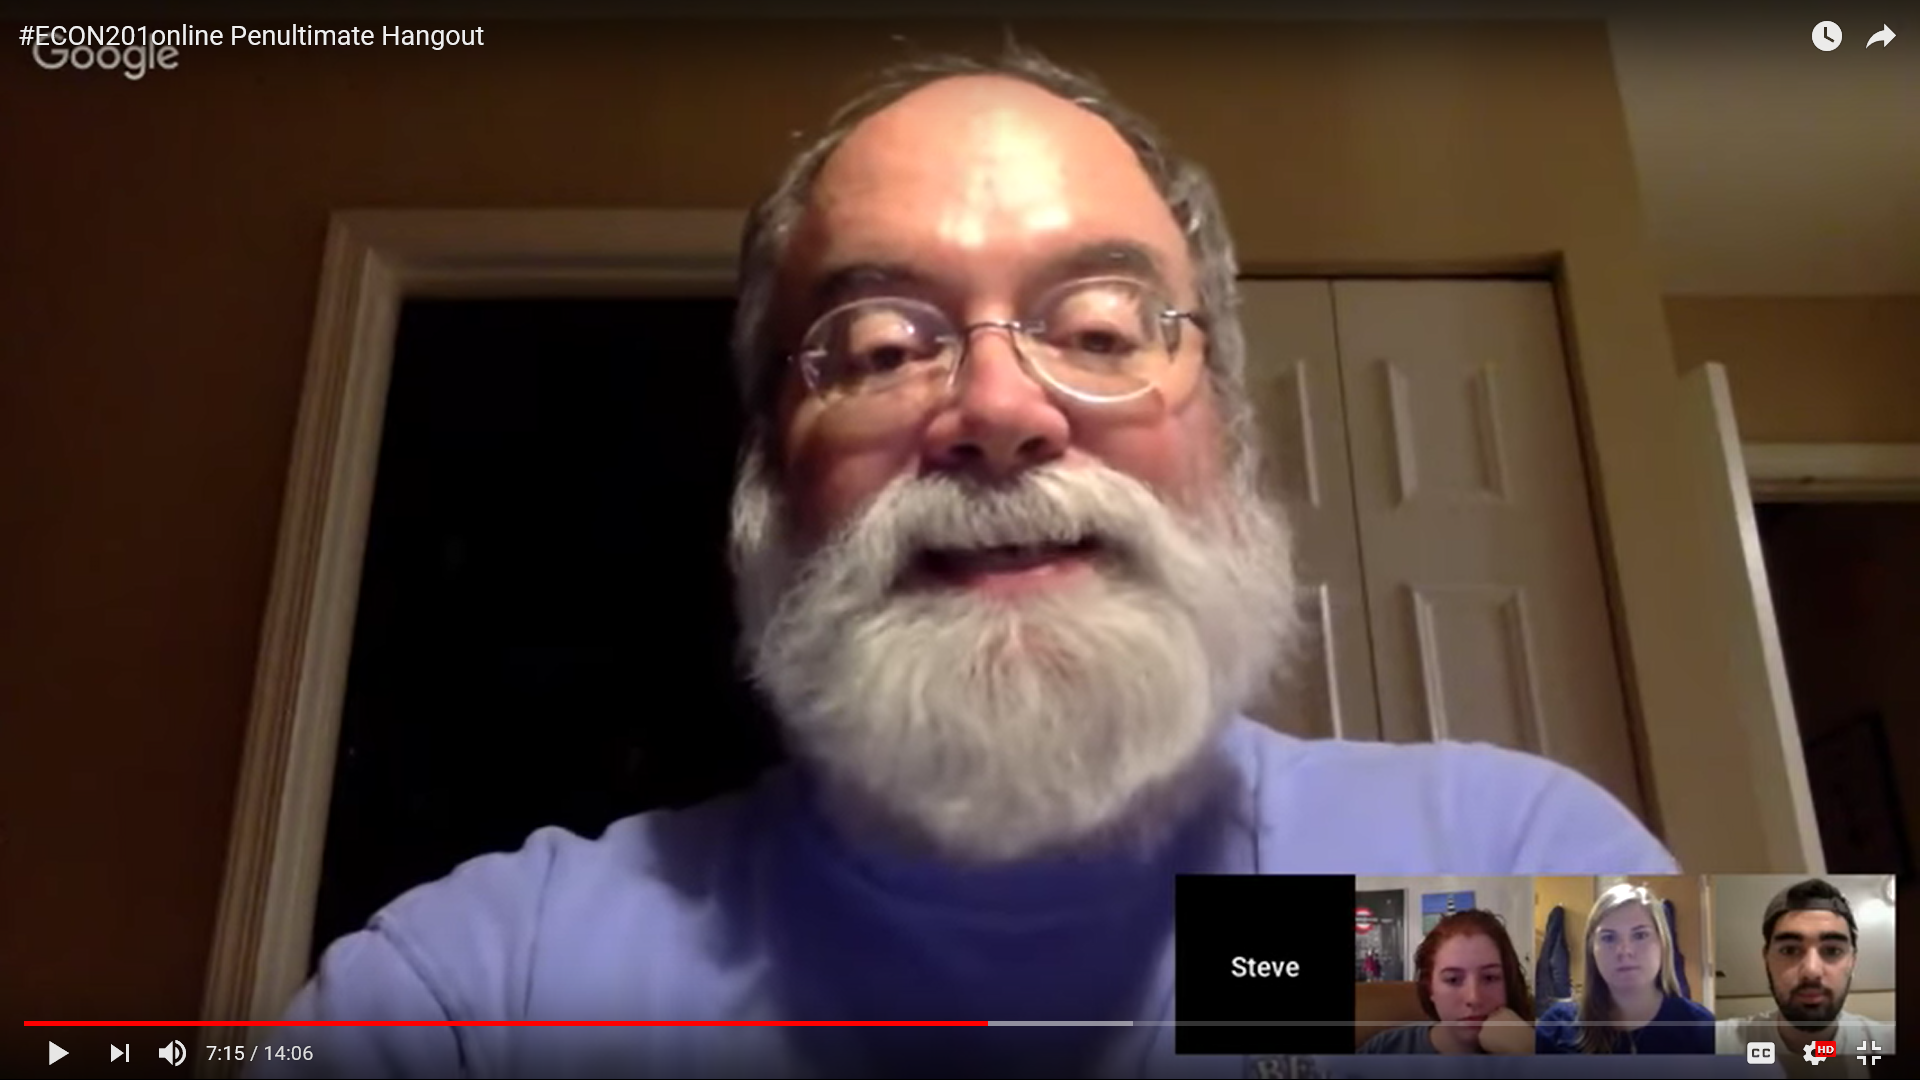 Steve Greenlaw, economics professor at the University of Mary Washington, meets with students on Skype and Google Hangout to advise them on group projects